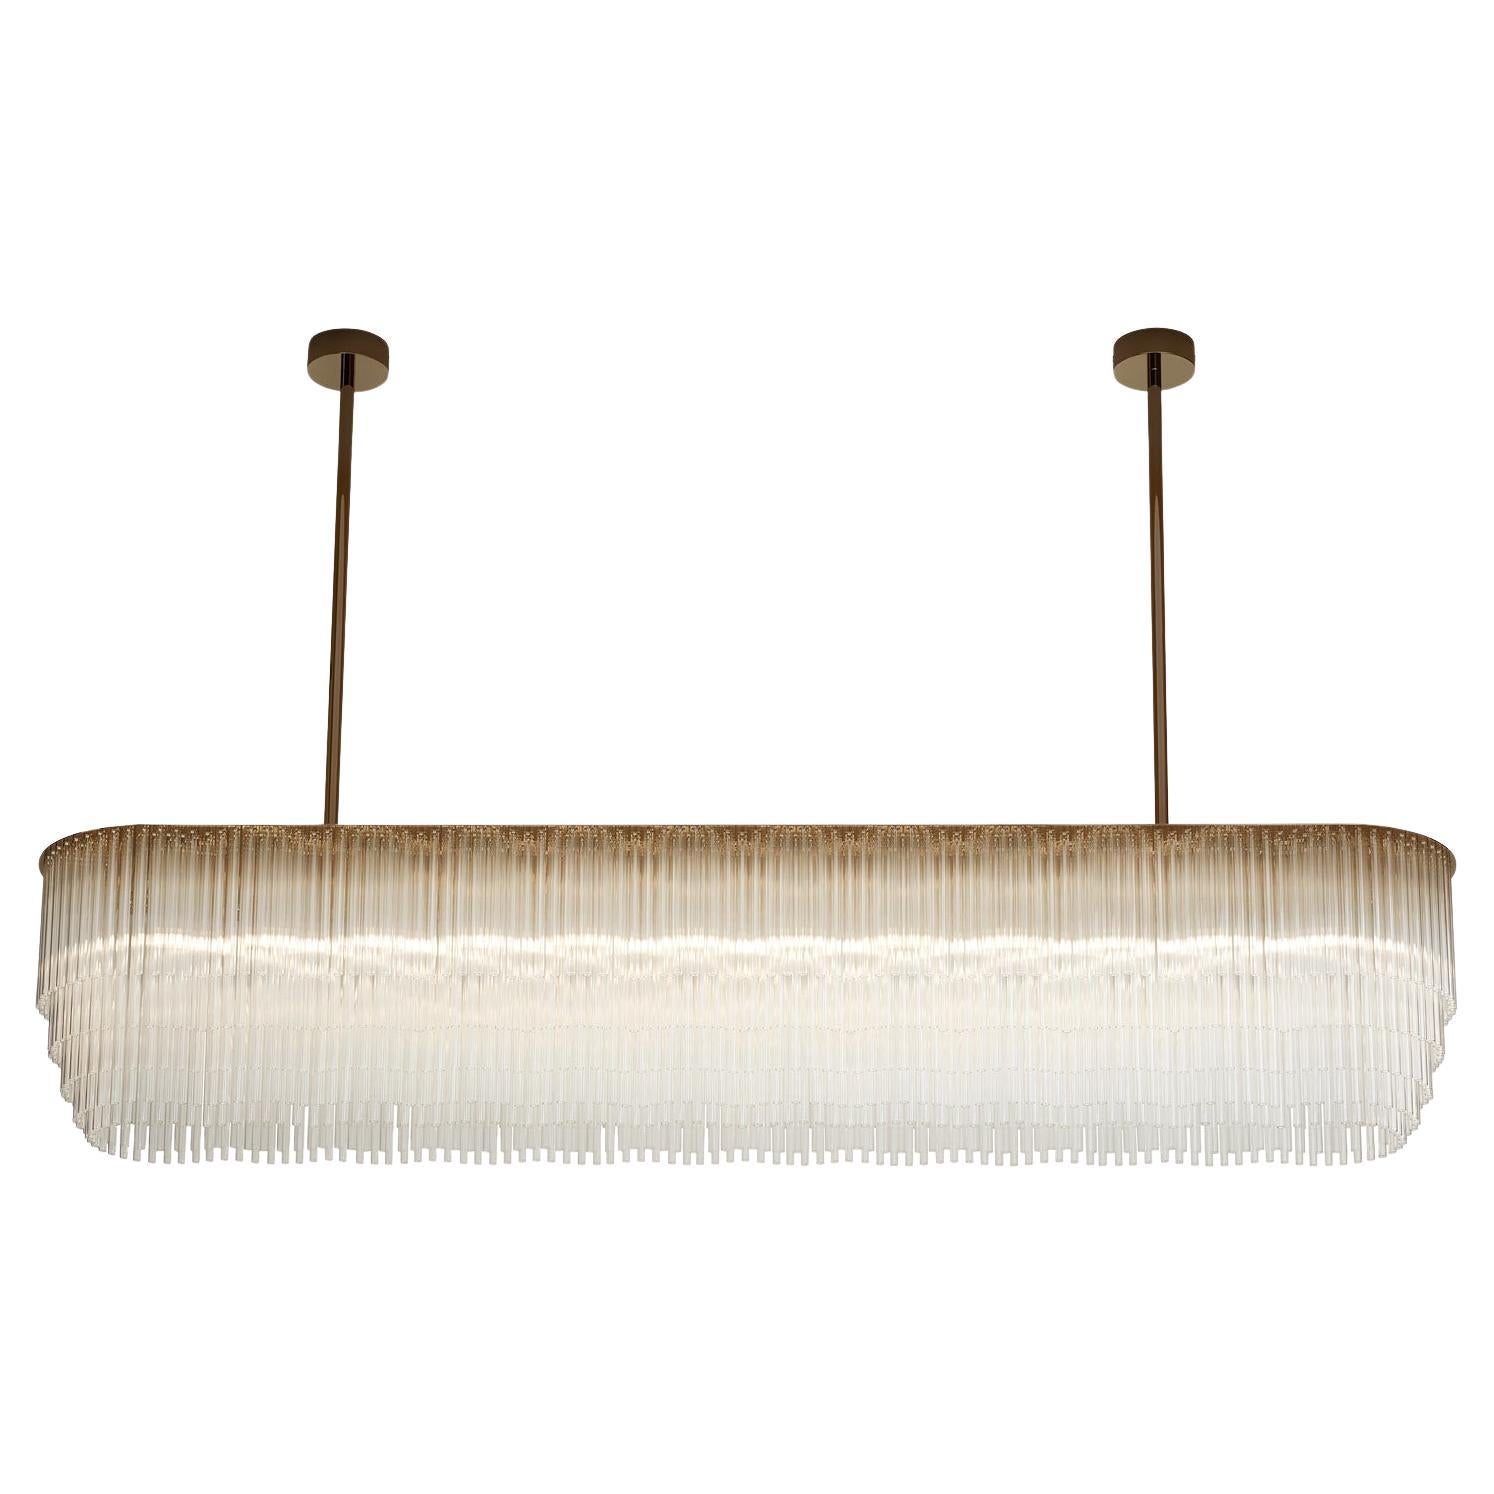 Linear Chandelier 1370mm / 54" Brass-based Bronze with Tiered Glass Profile For Sale